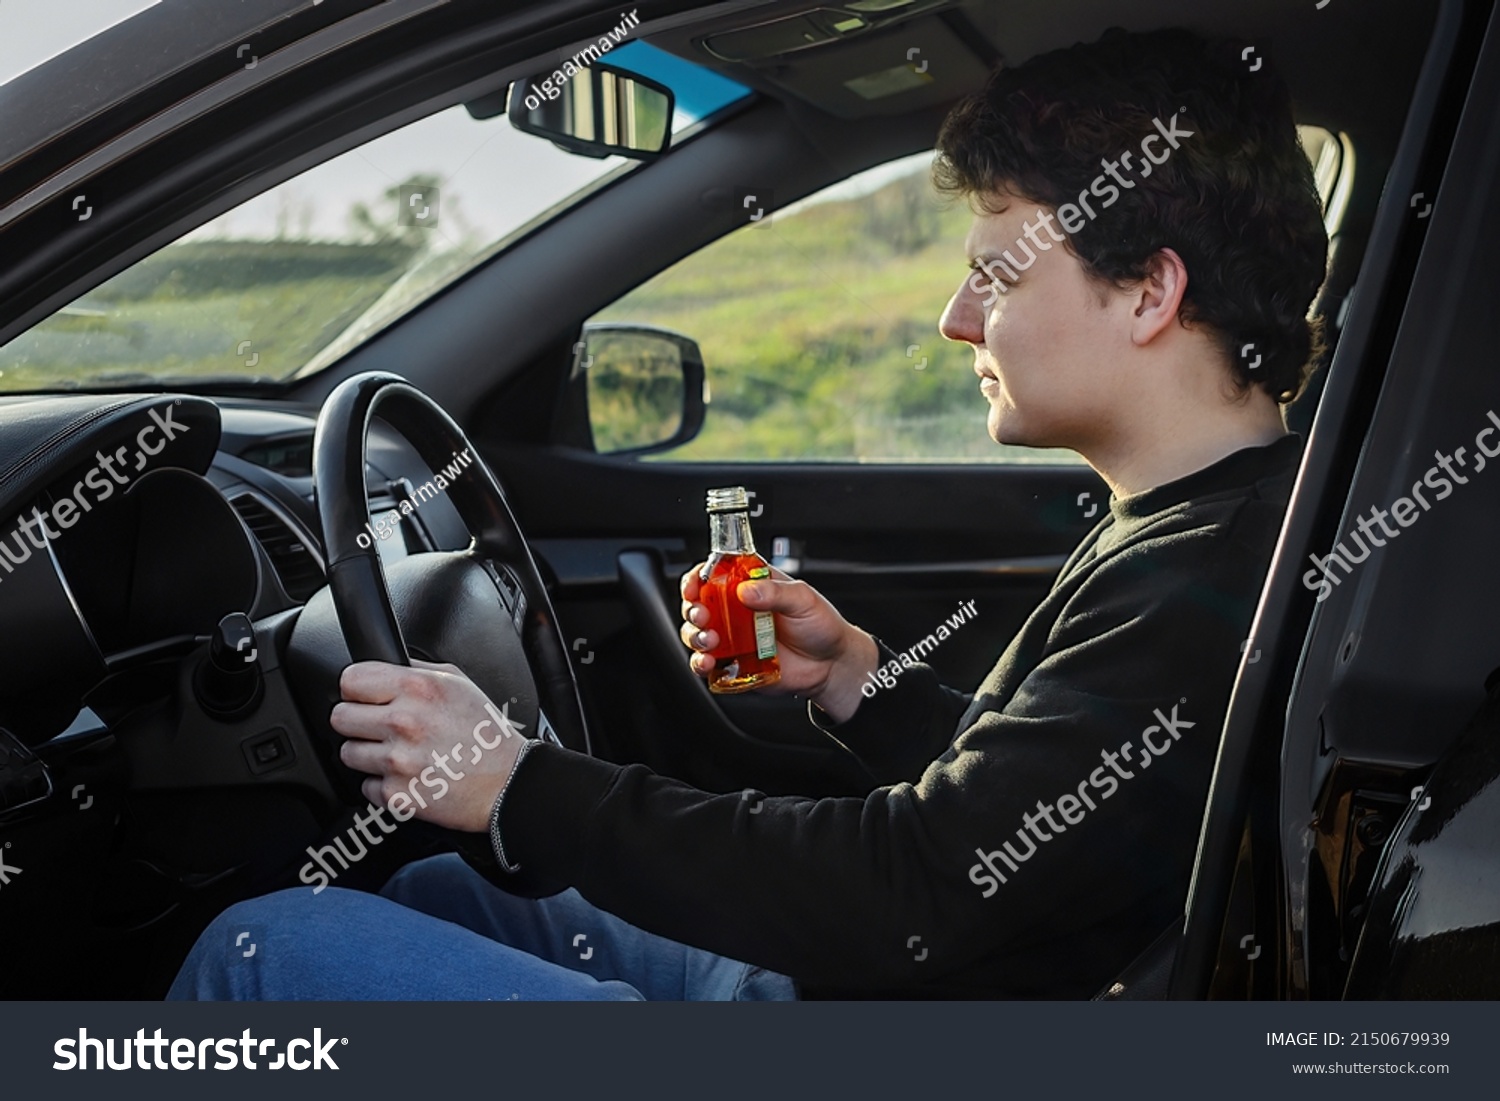 The driver, a young man driving a car, drinks an alcoholic brandy drink from a bottle  #2150679939